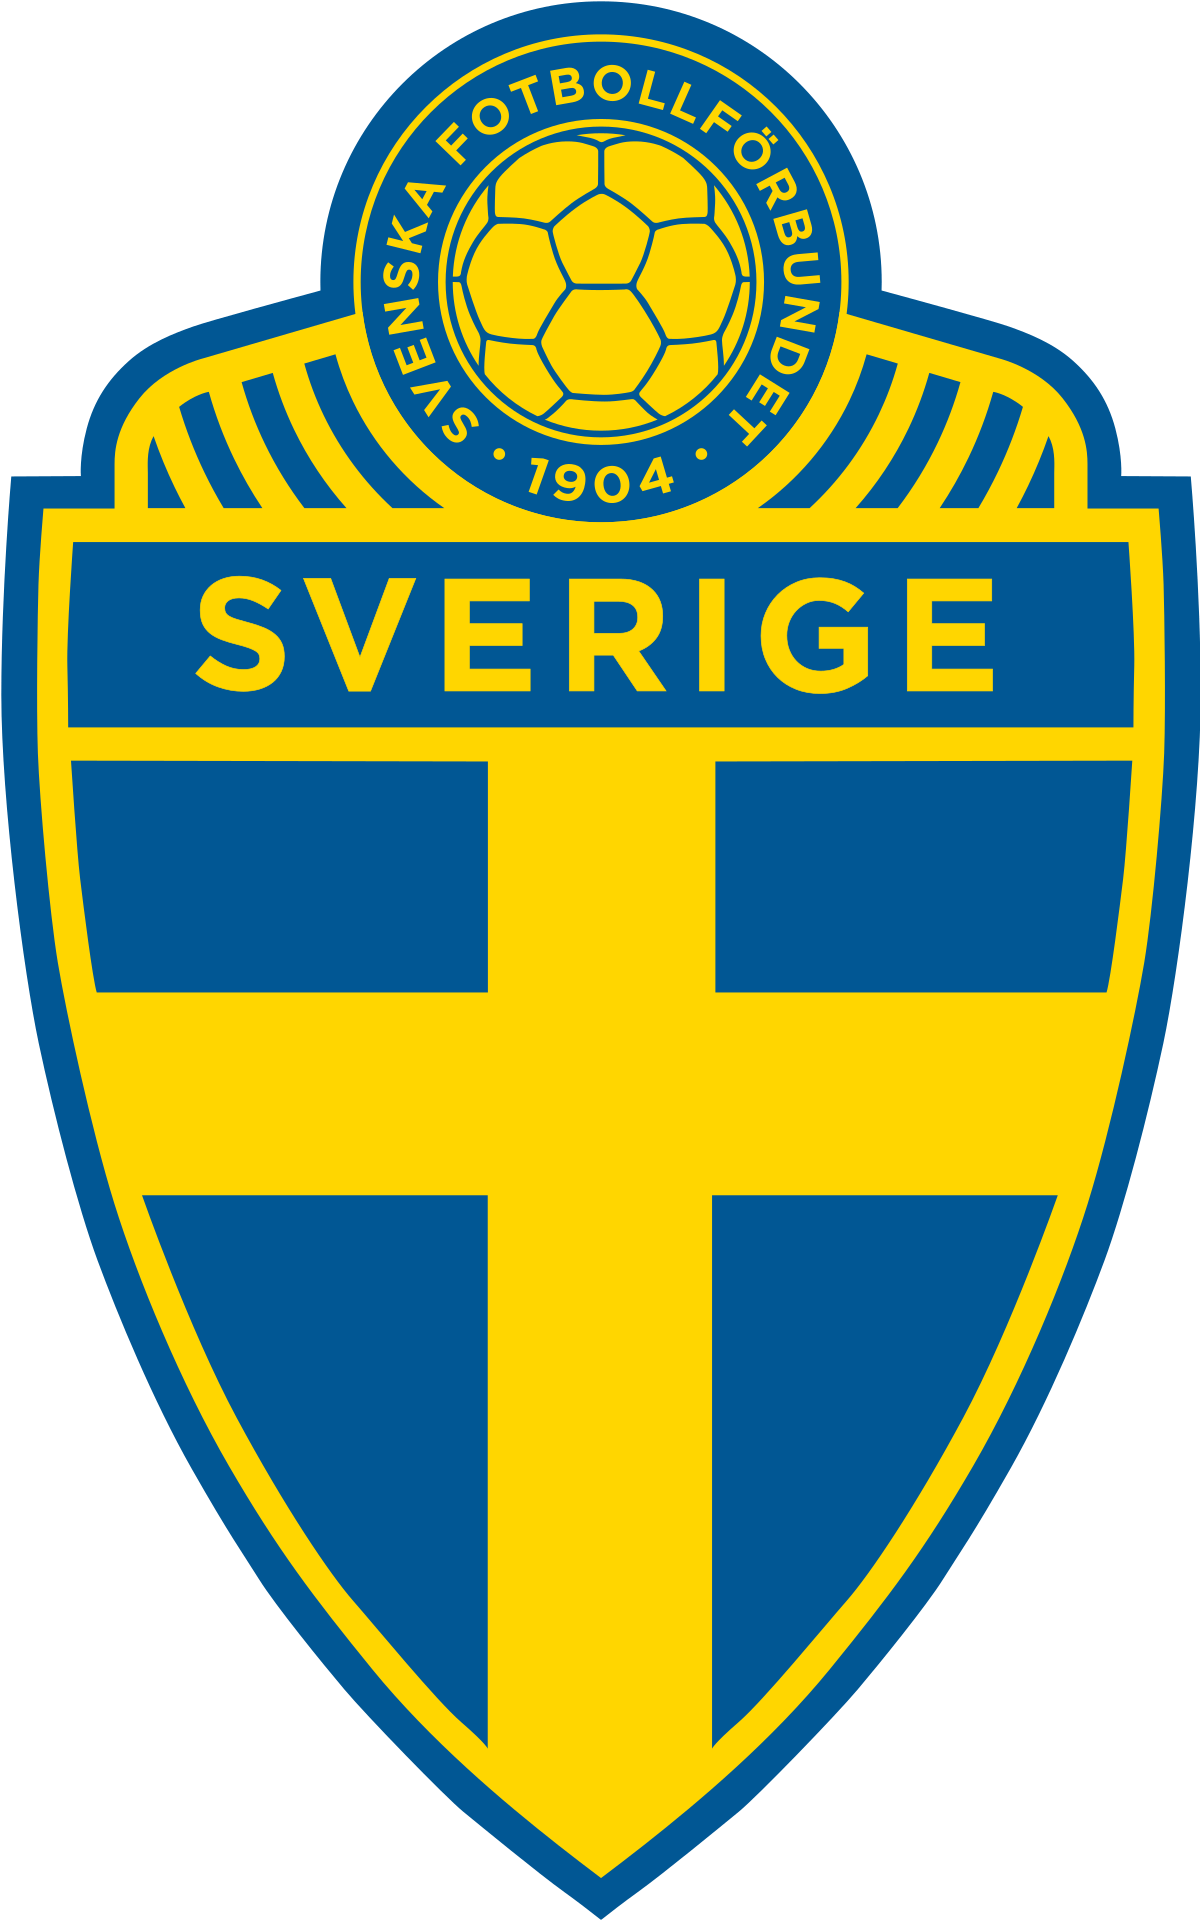 Red and Blue Football Logo - Sweden national football team